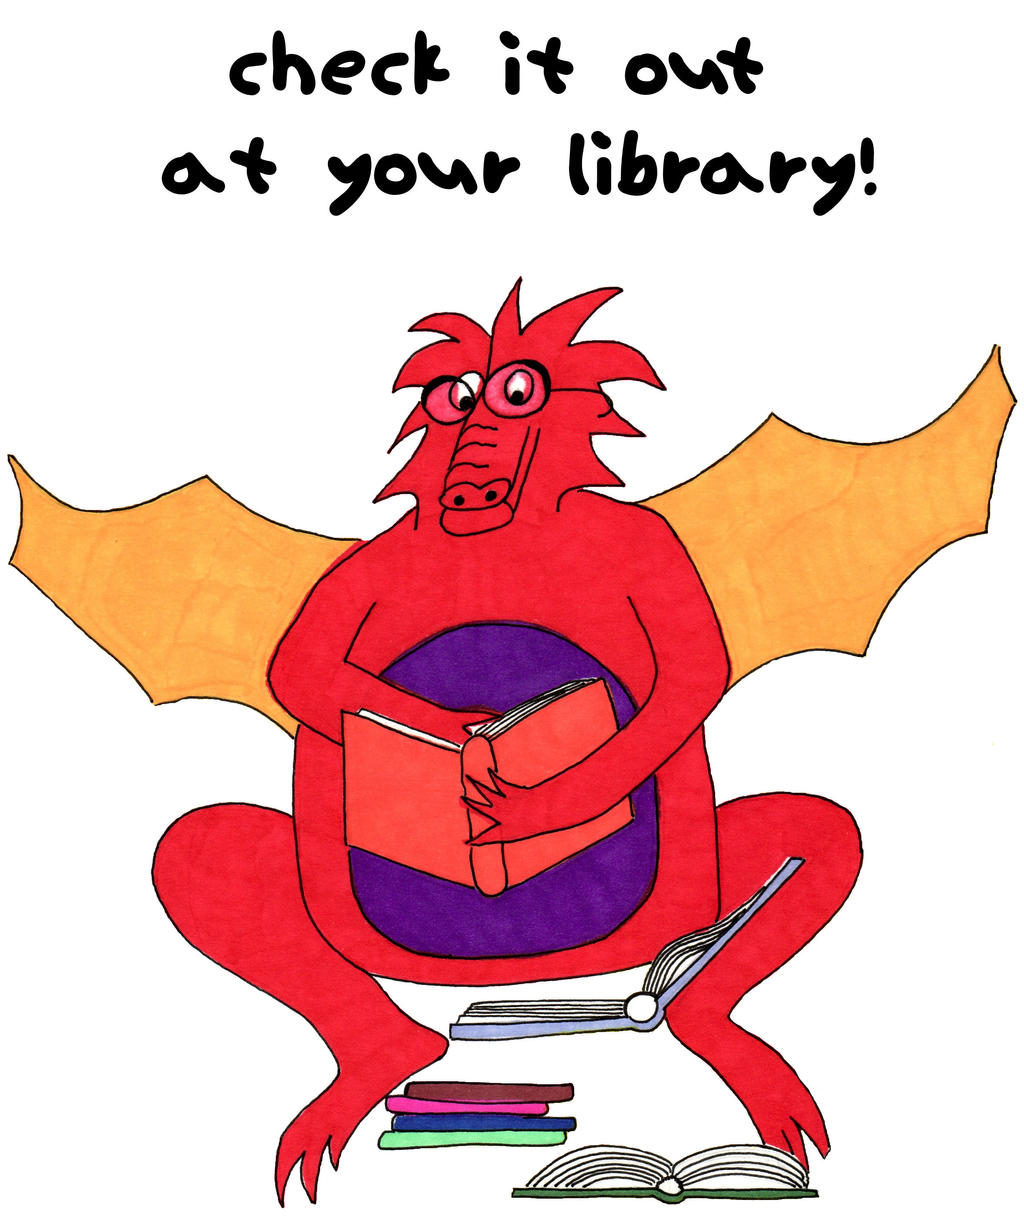 Library Dragon by Robo-Amber on DeviantArt